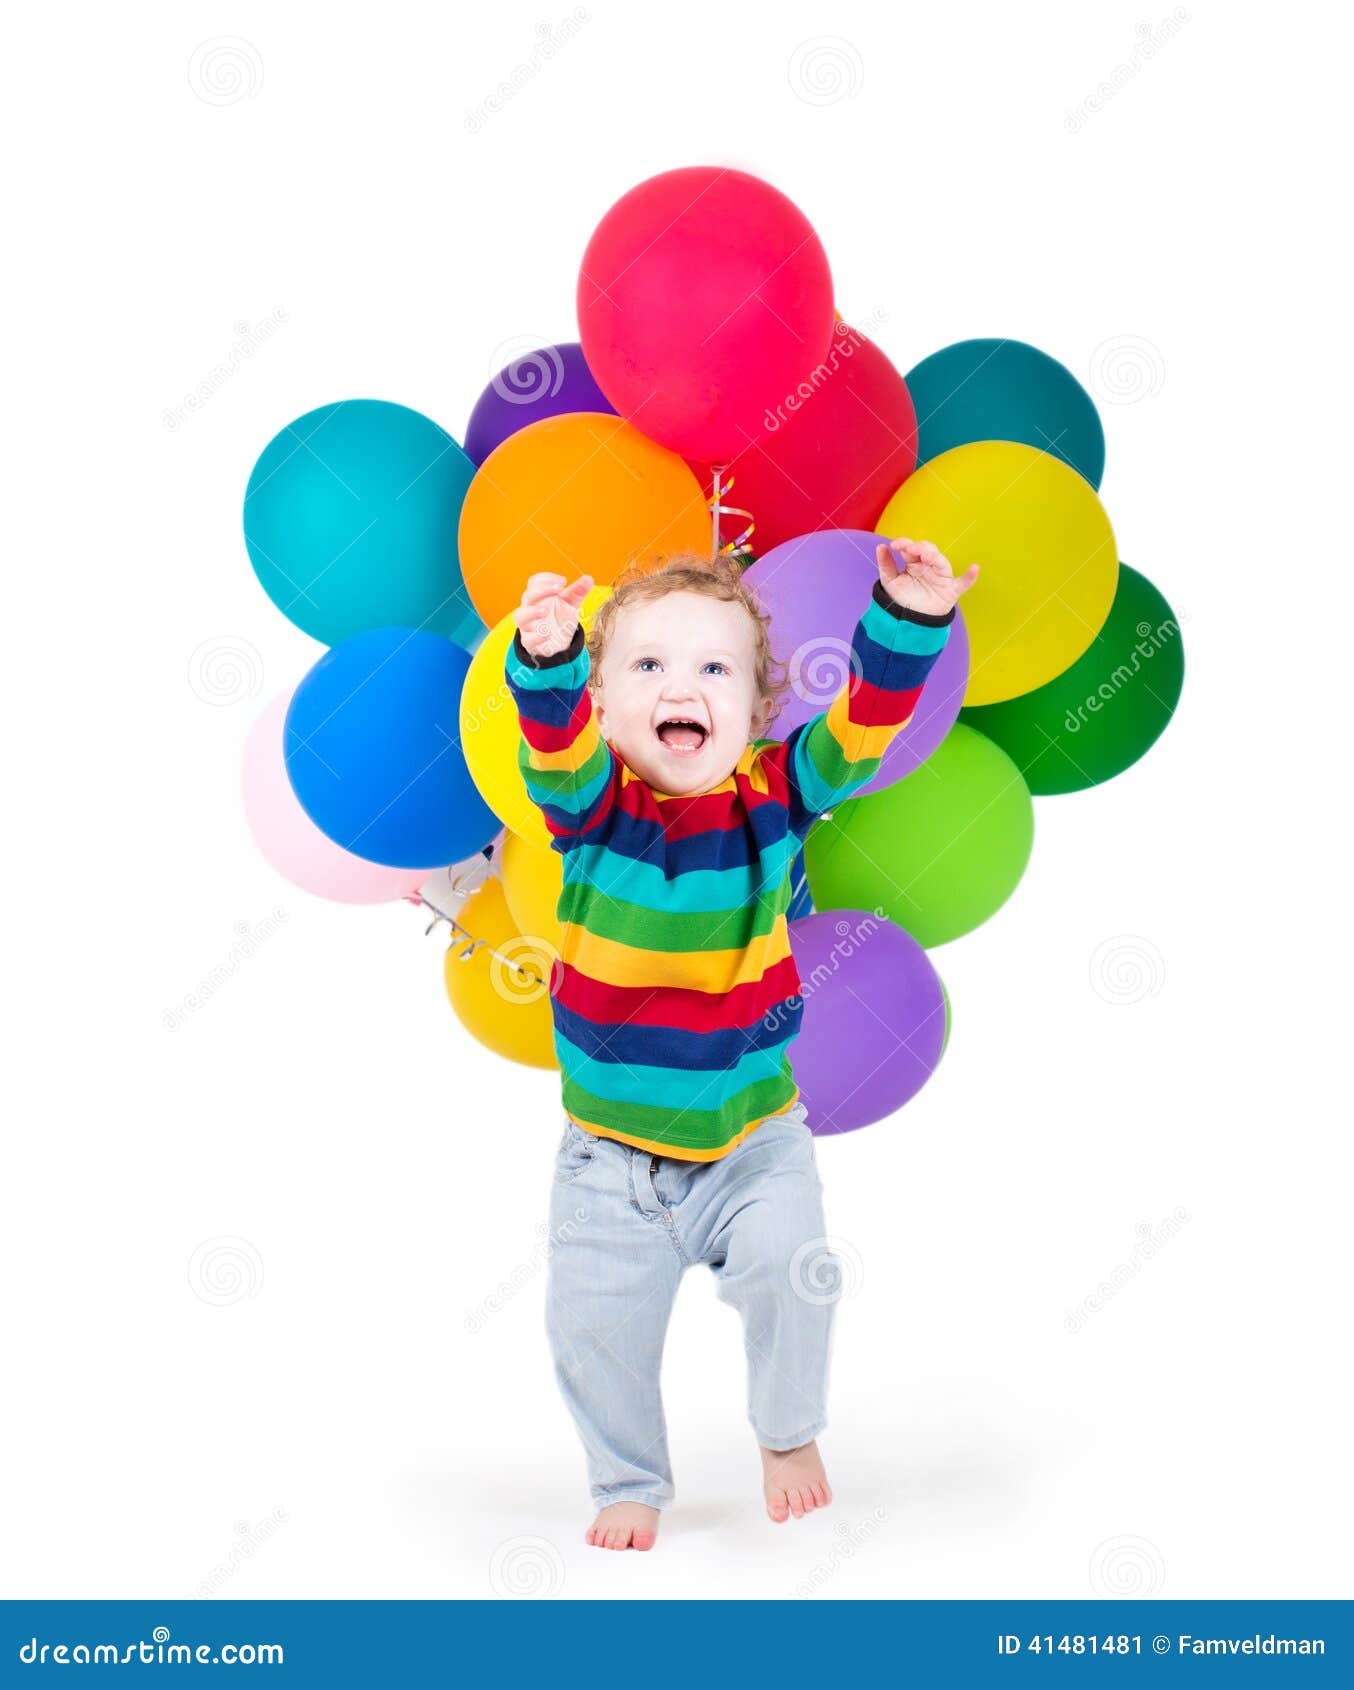 Funny Laughing Baby Playing With Party Balloons Stock Photo - Image ...